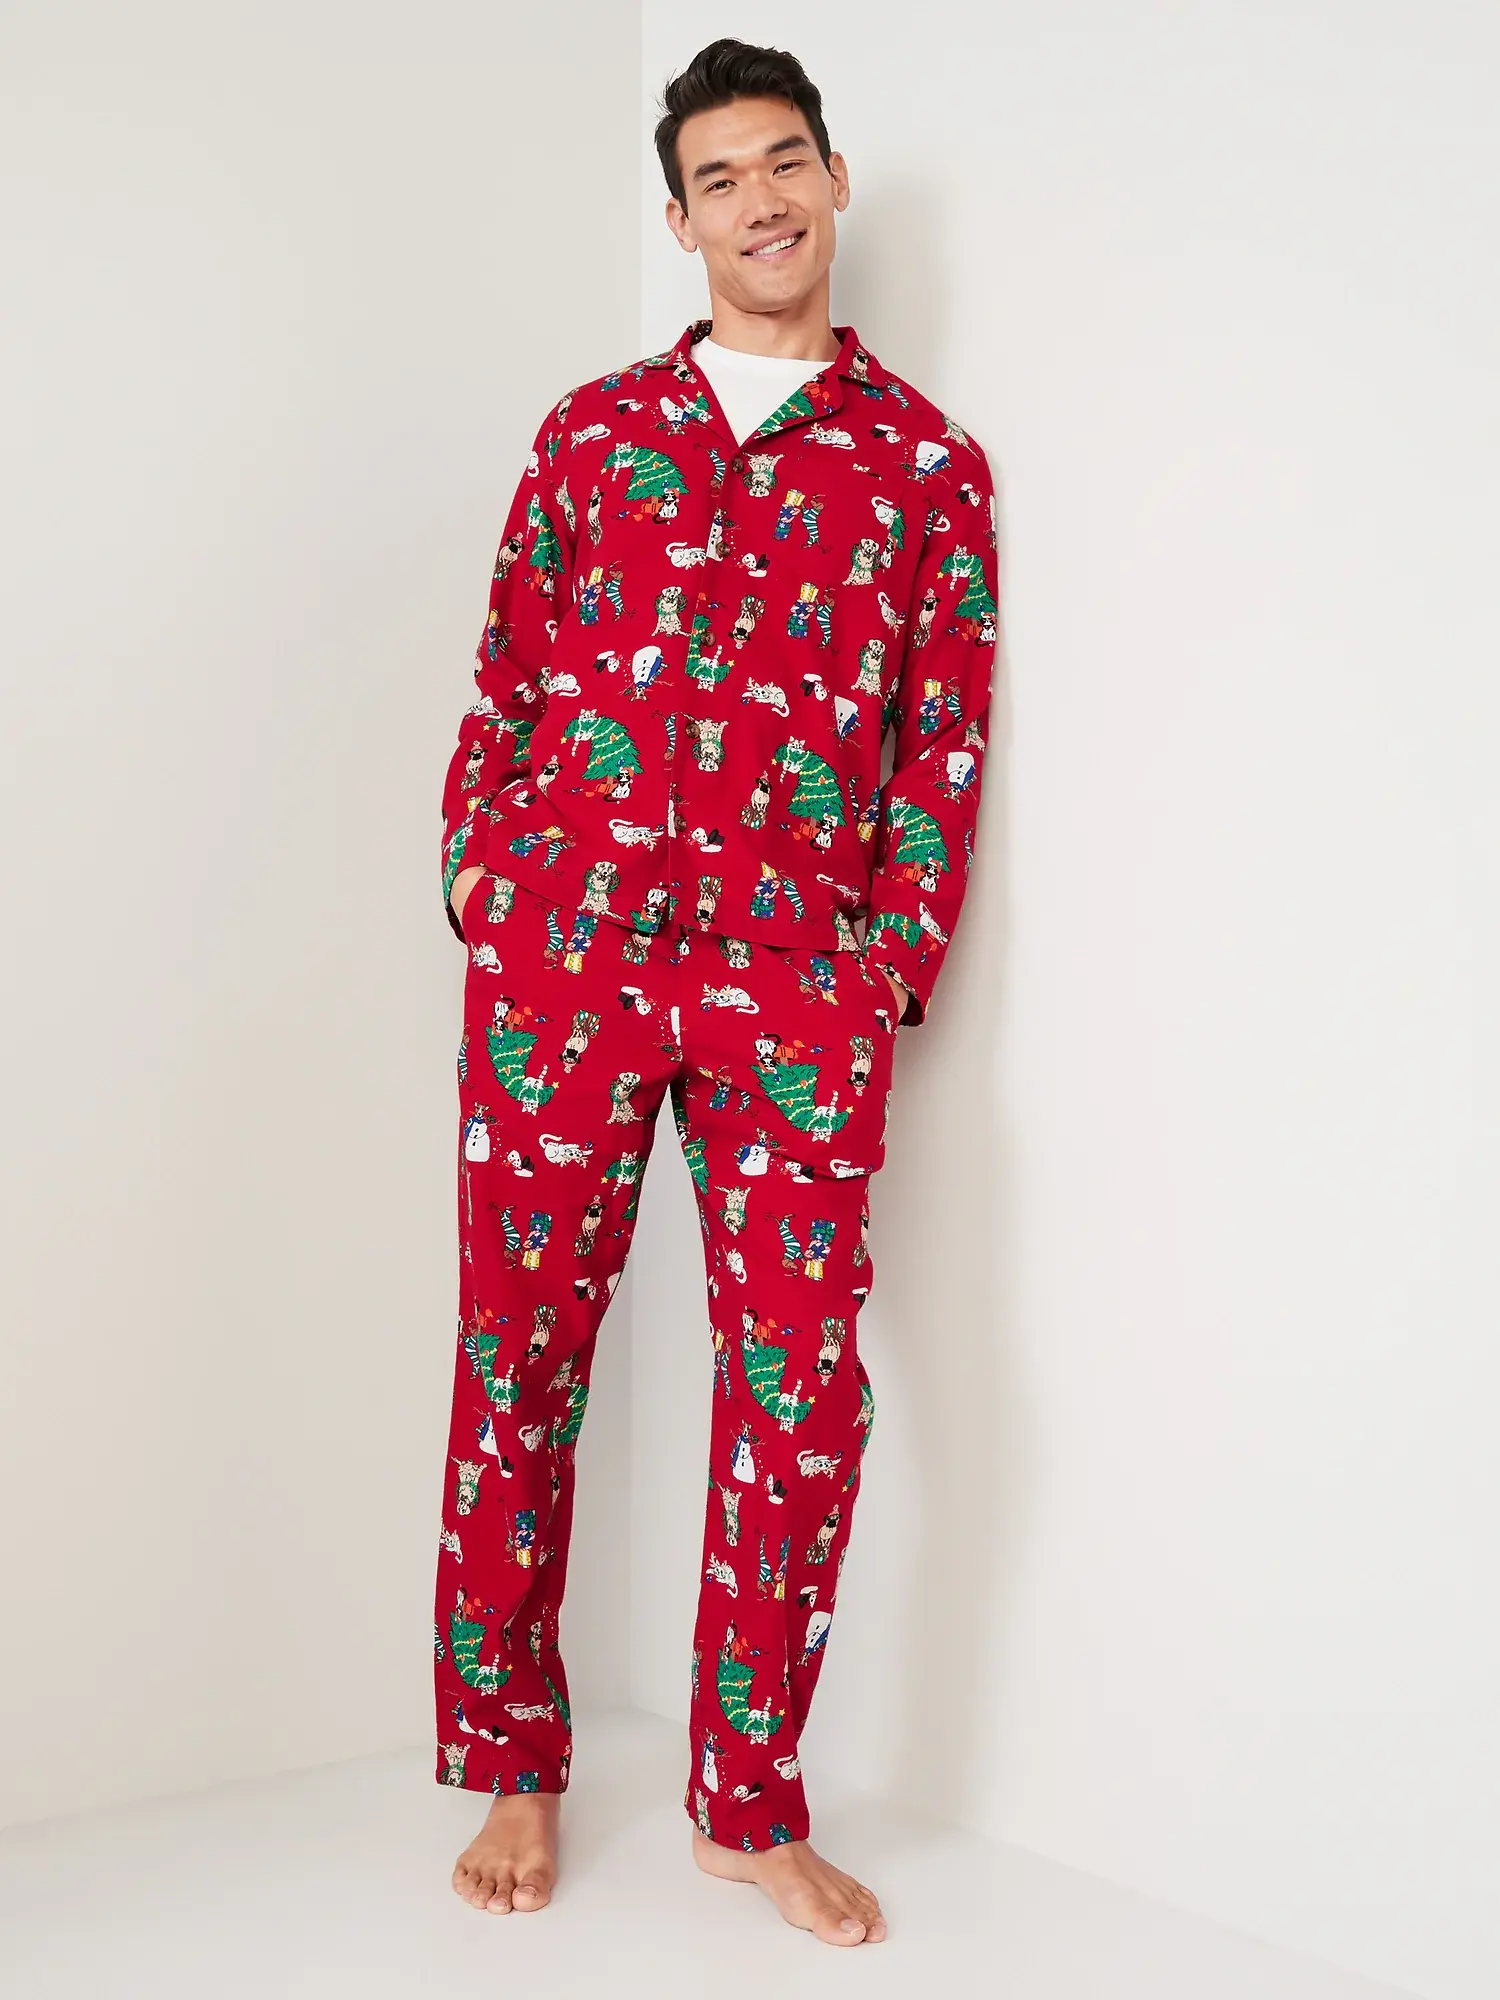 Old Navy Matching Holiday Print Flannel Pajamas Set for Men red. 1